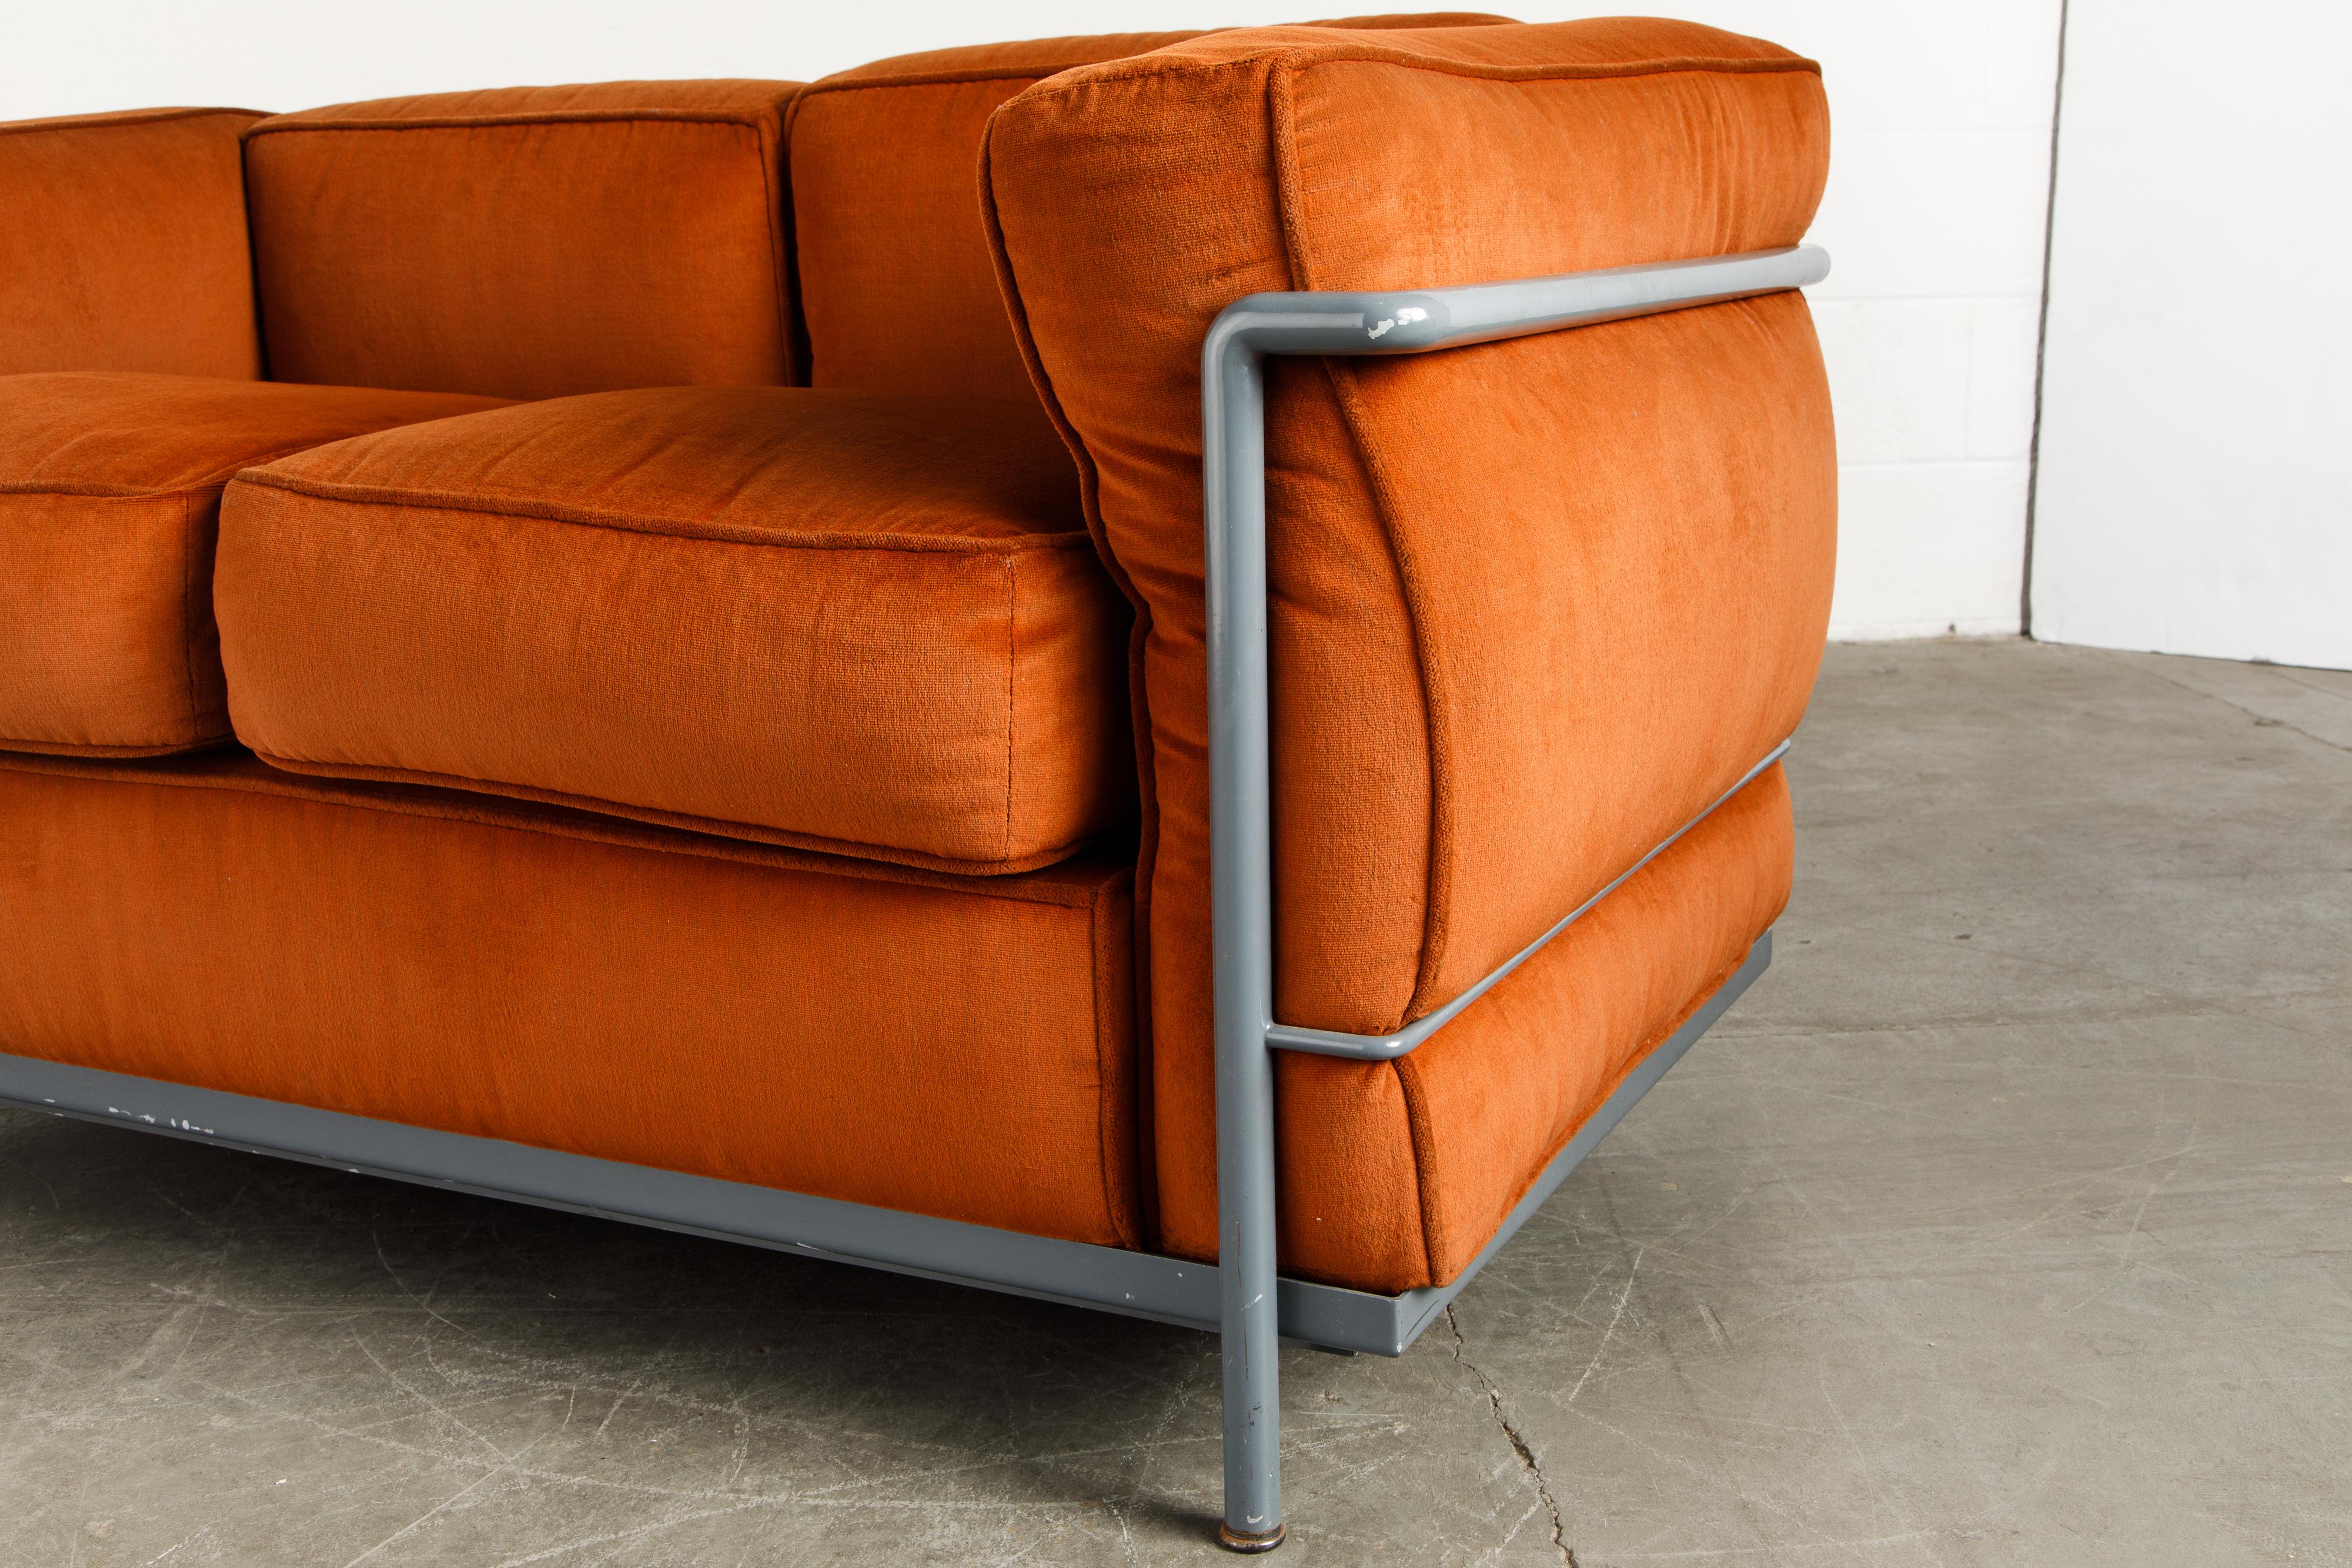 Early Production LC2 Loveseat Sofa by Le Corbusier for Cassina, c. 1965, Signed 6